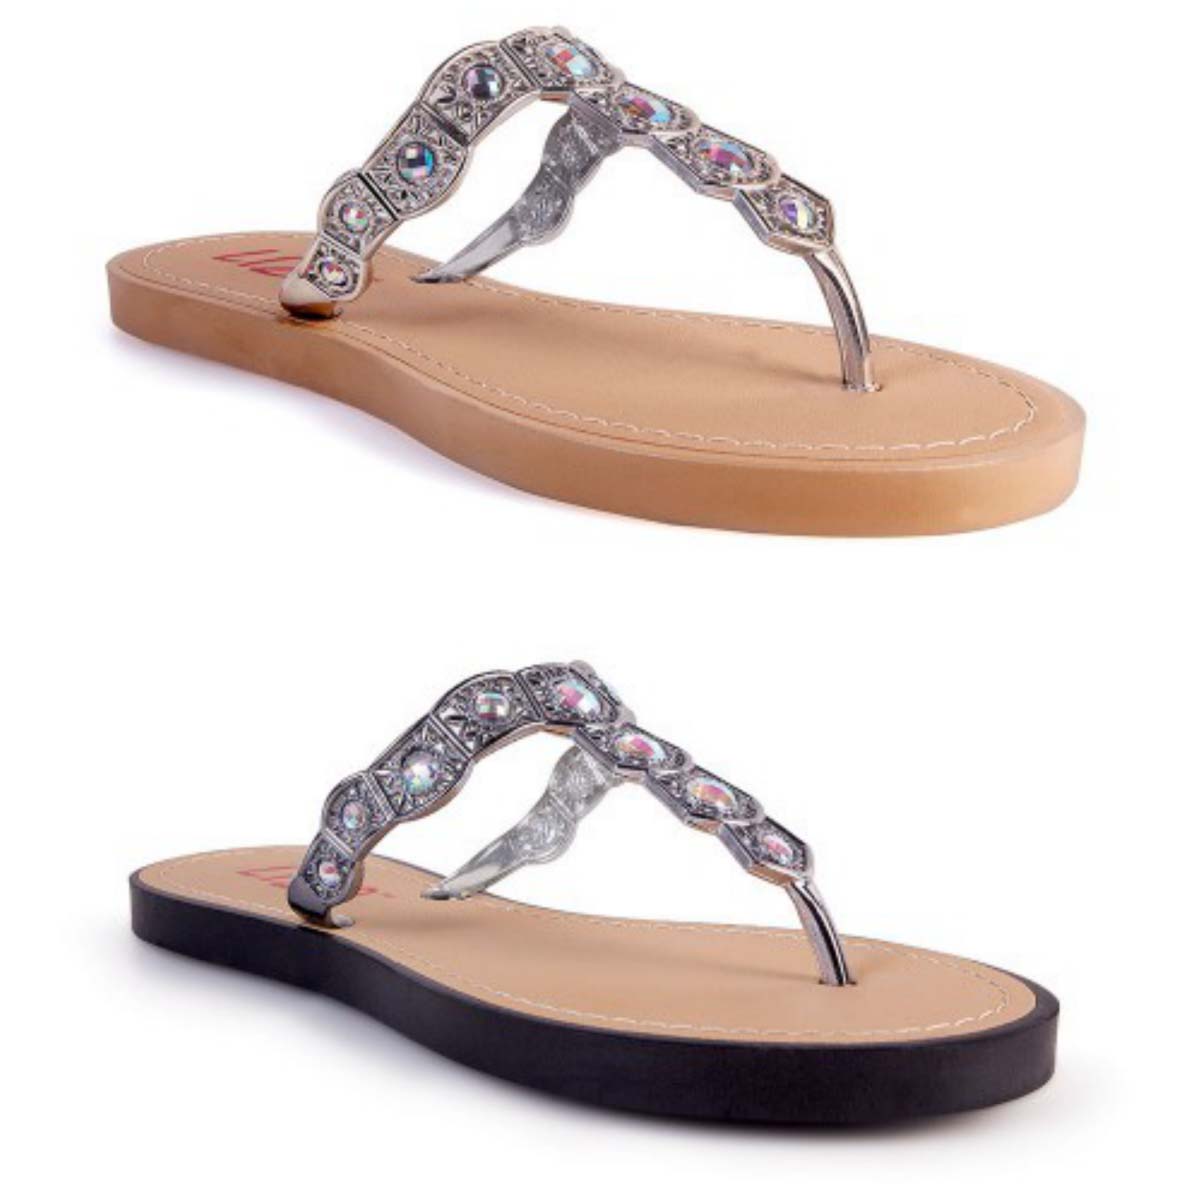 Latest Servis Shoes Chappals and Sandals Collection For Women 2016-2107 ...